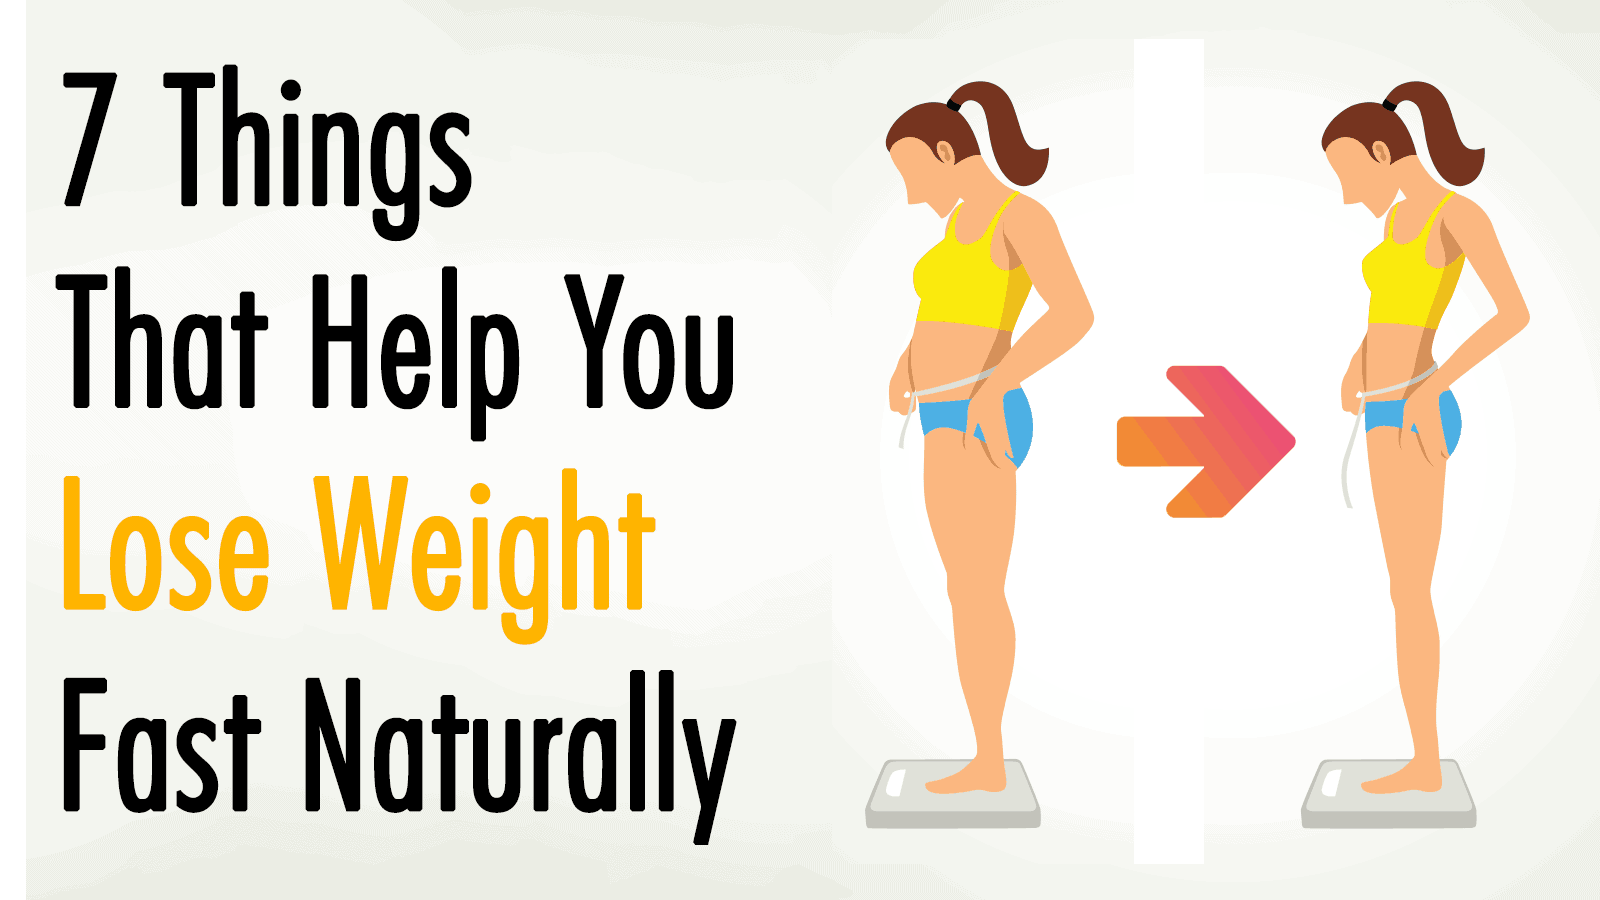 How to Lose Weight Fast: 8 Simple Steps, Based on Science